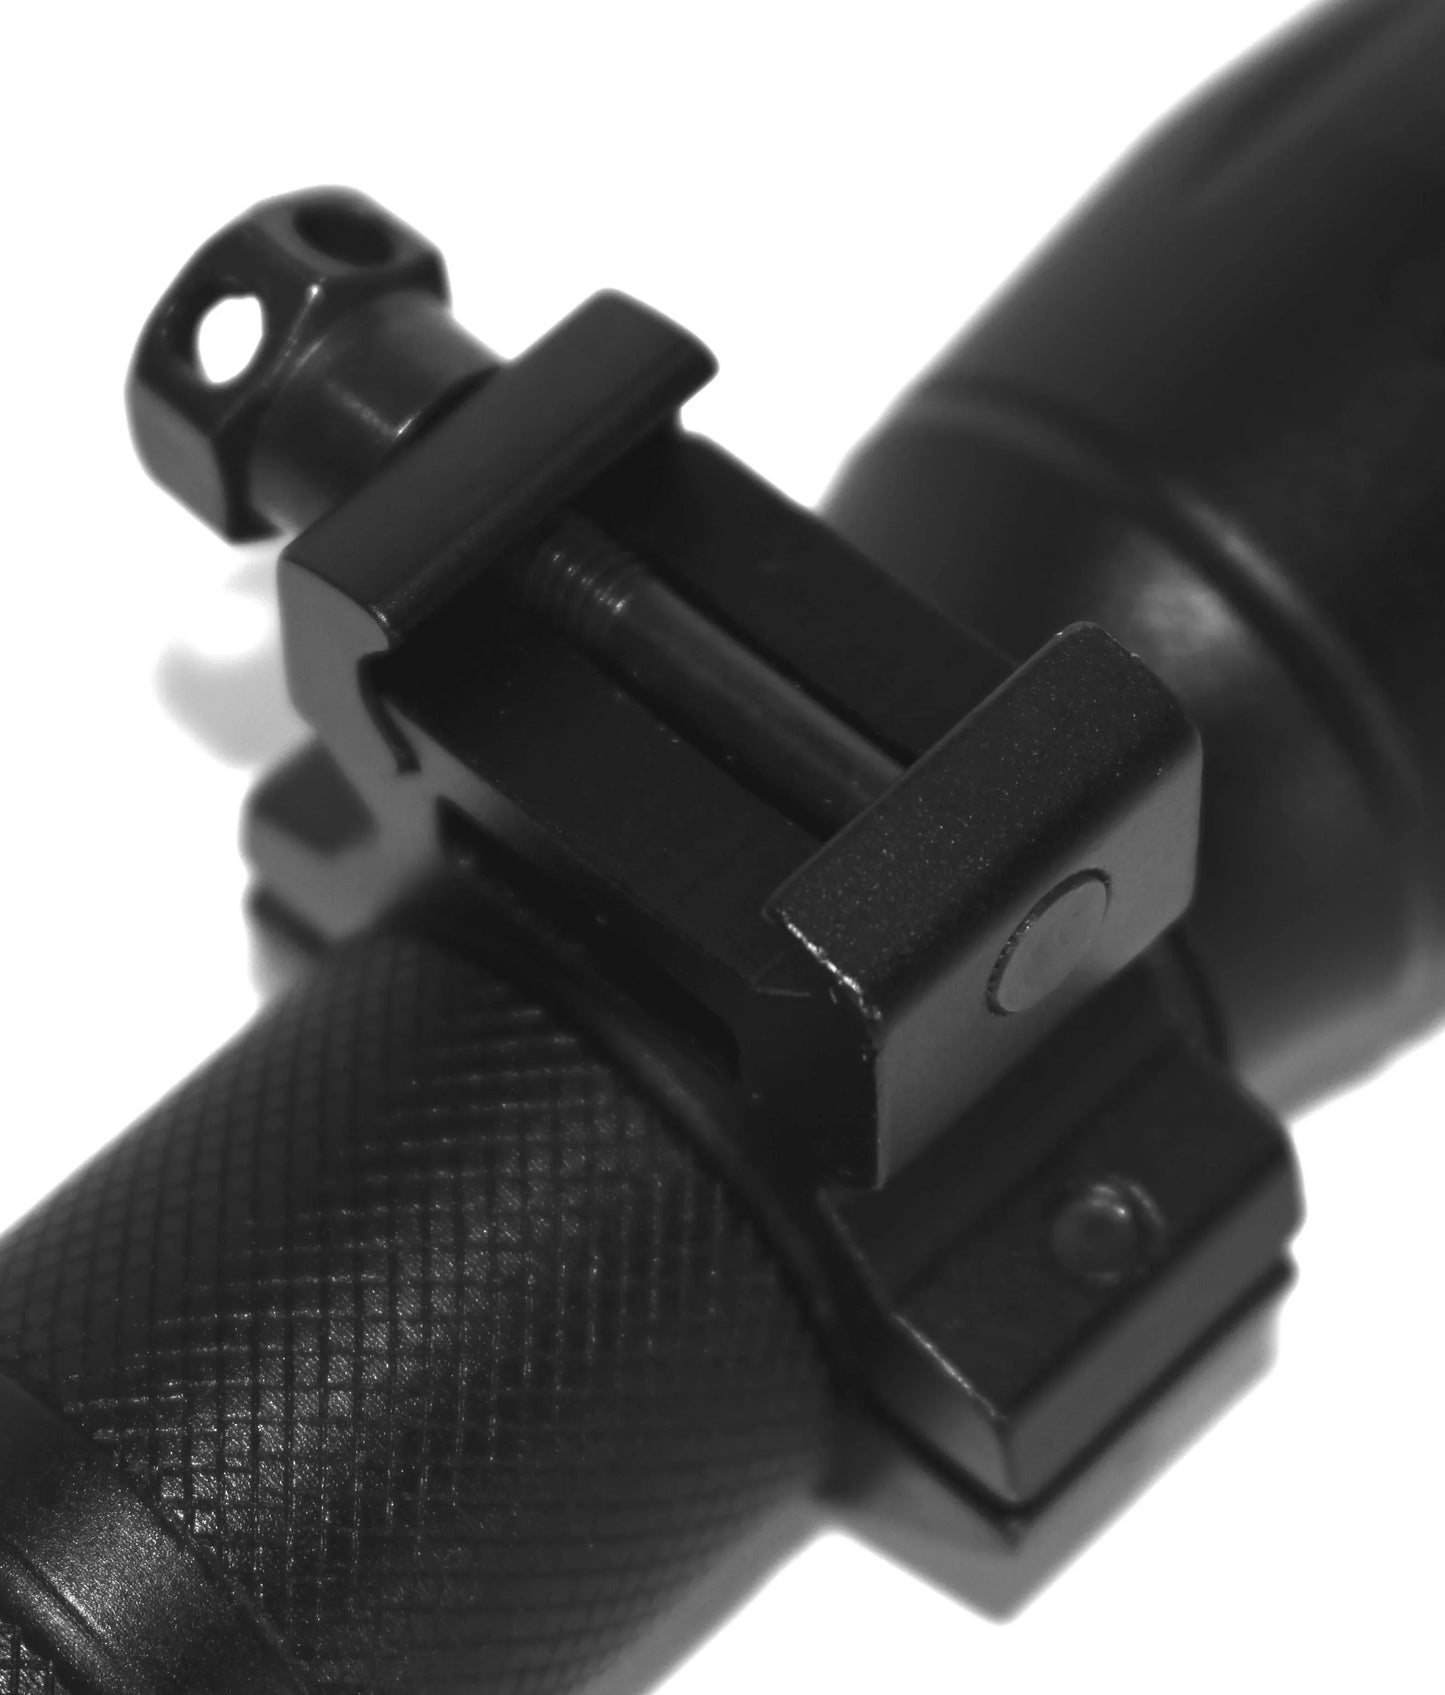 Tactical flashlight 1000 lumen with magazine tube mount compatible with 12 gauge pumps.